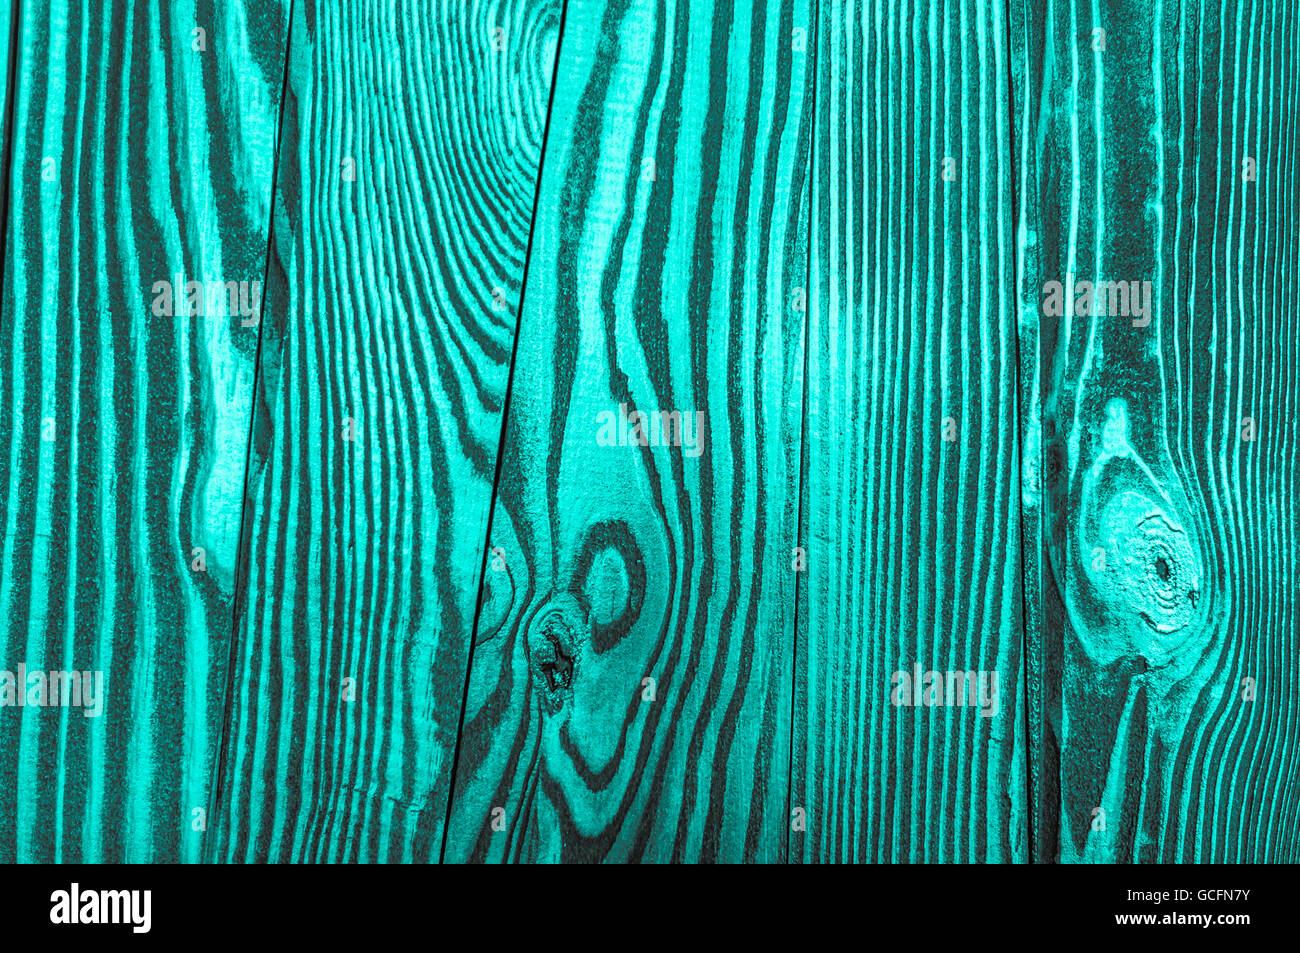 Perfect turquoise grayish gray scale irregular old and rough wood timber close-up texture background Stock Photo